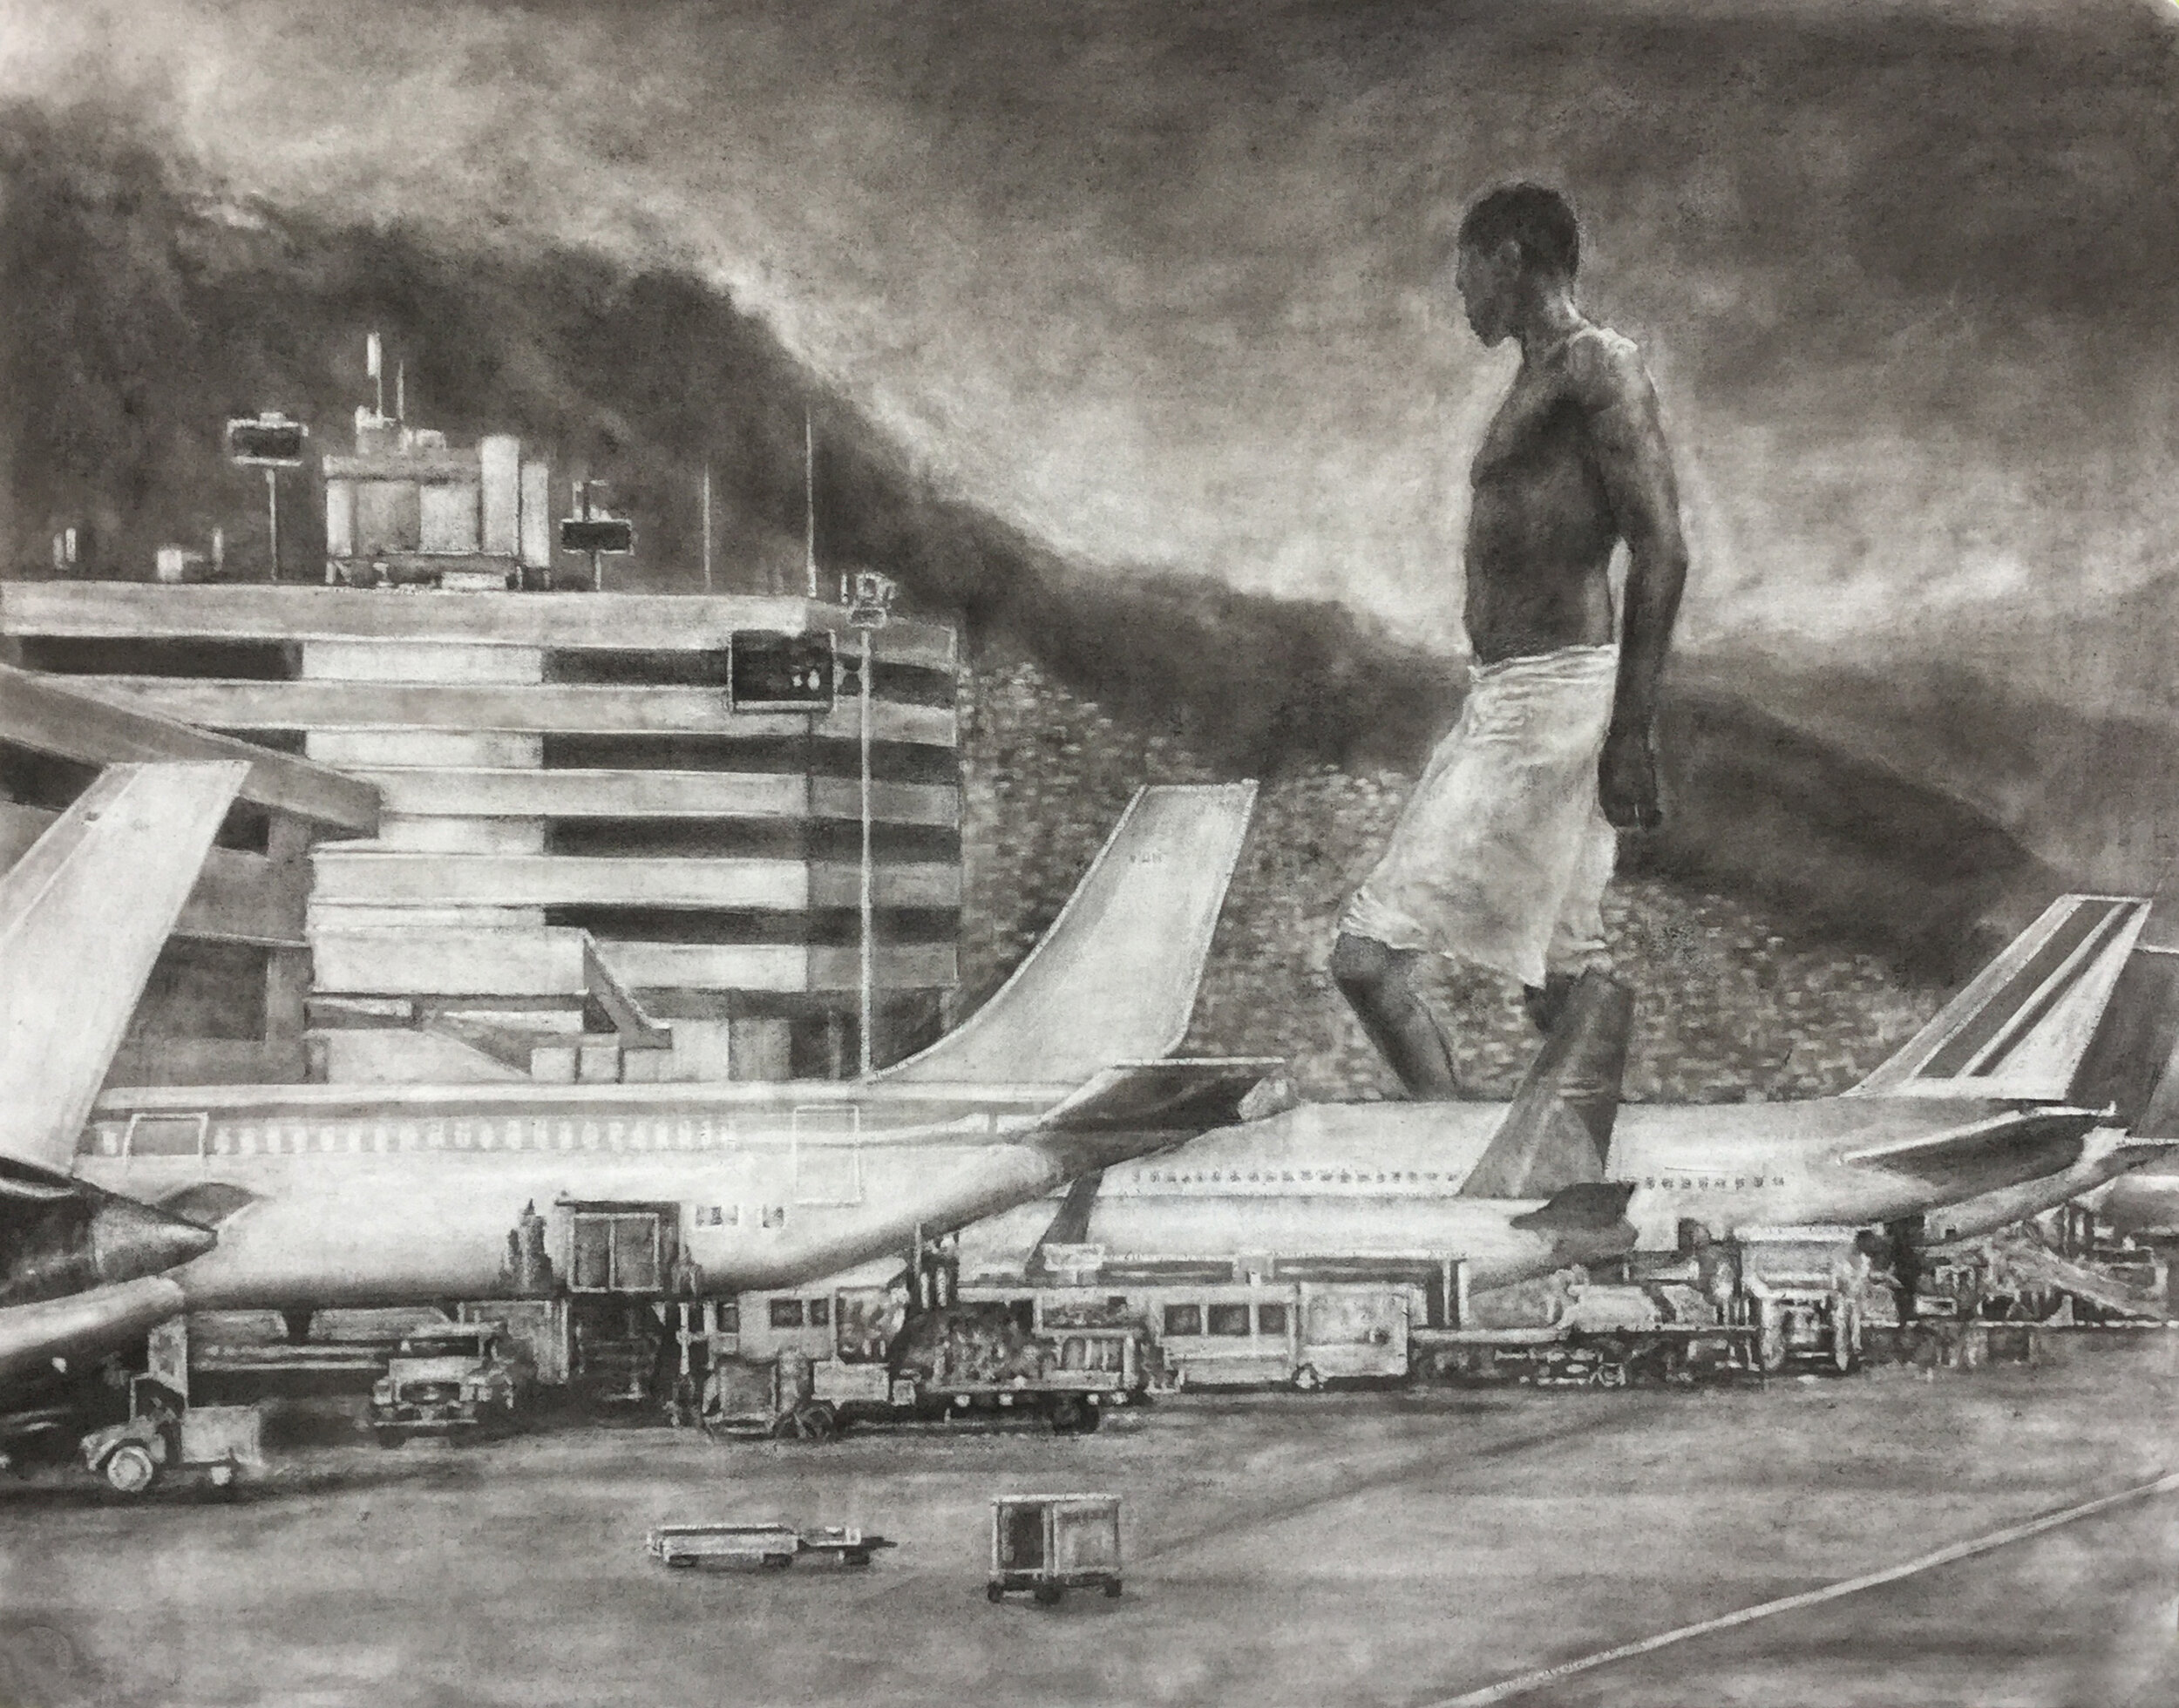    Flight  , charcoal on paper, 23 x 29 inches, 2015 